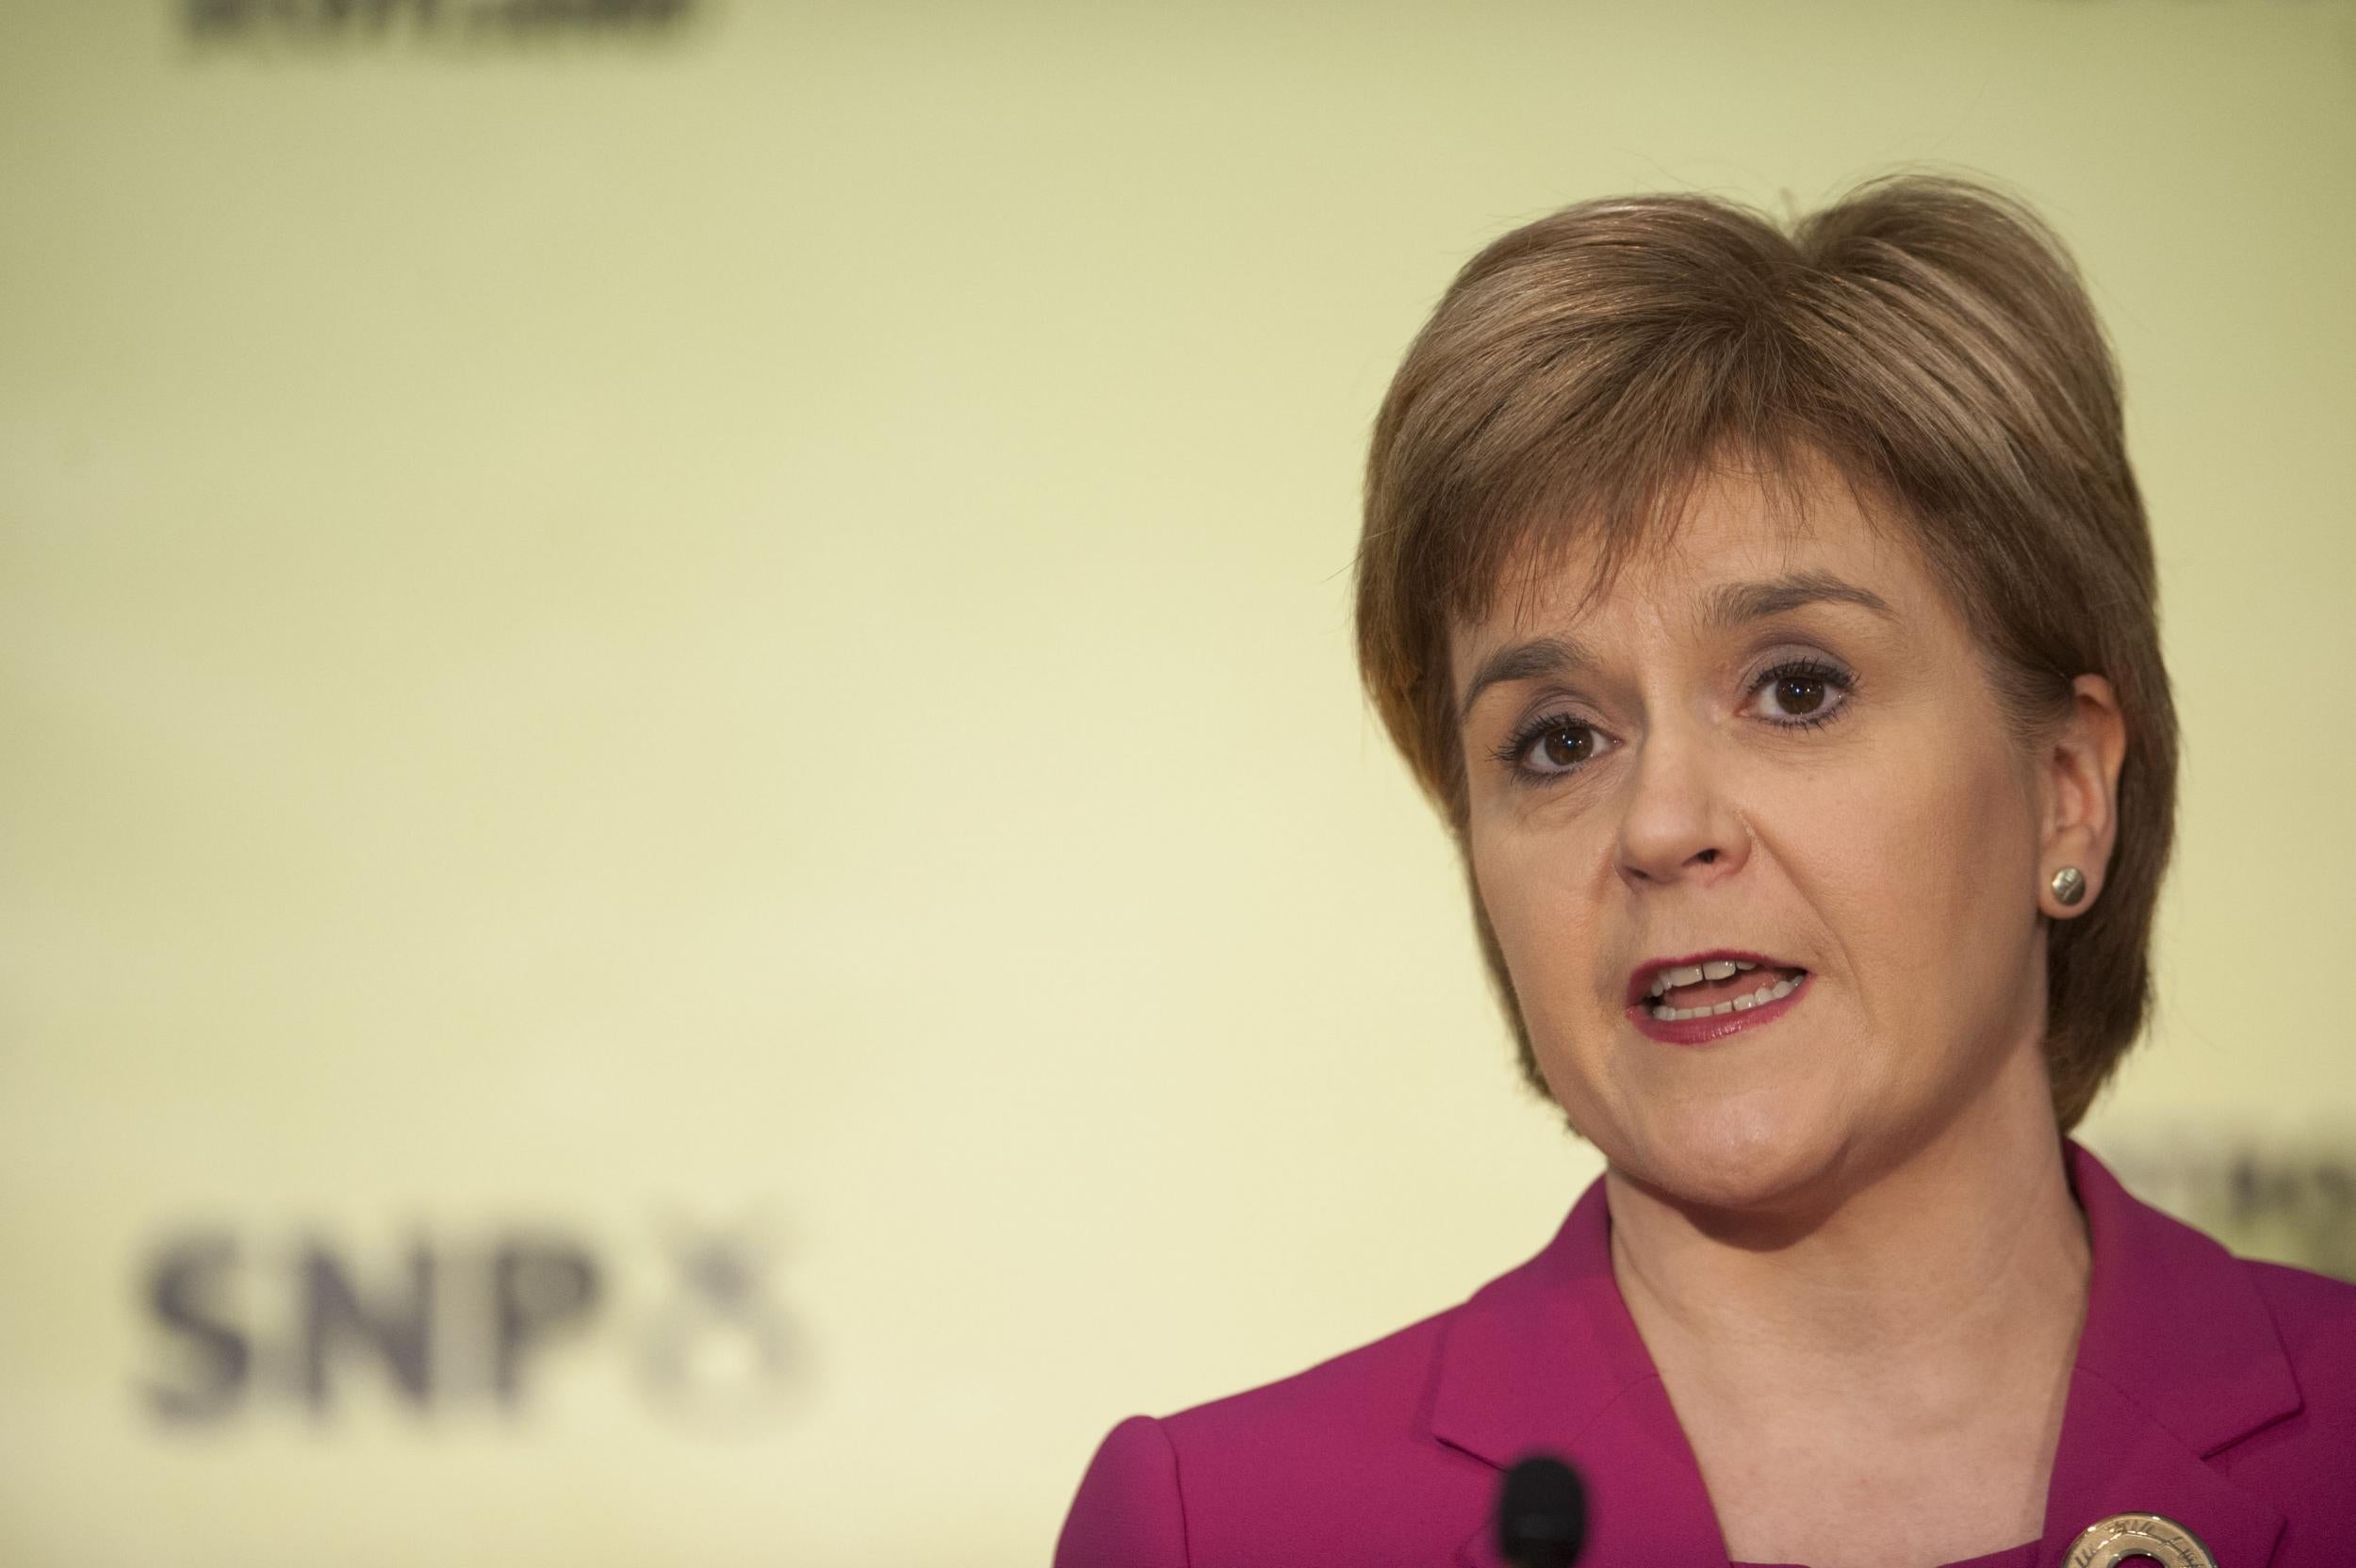 Nicola Sturgeon said Labour was too 'deeply divided' to offer a